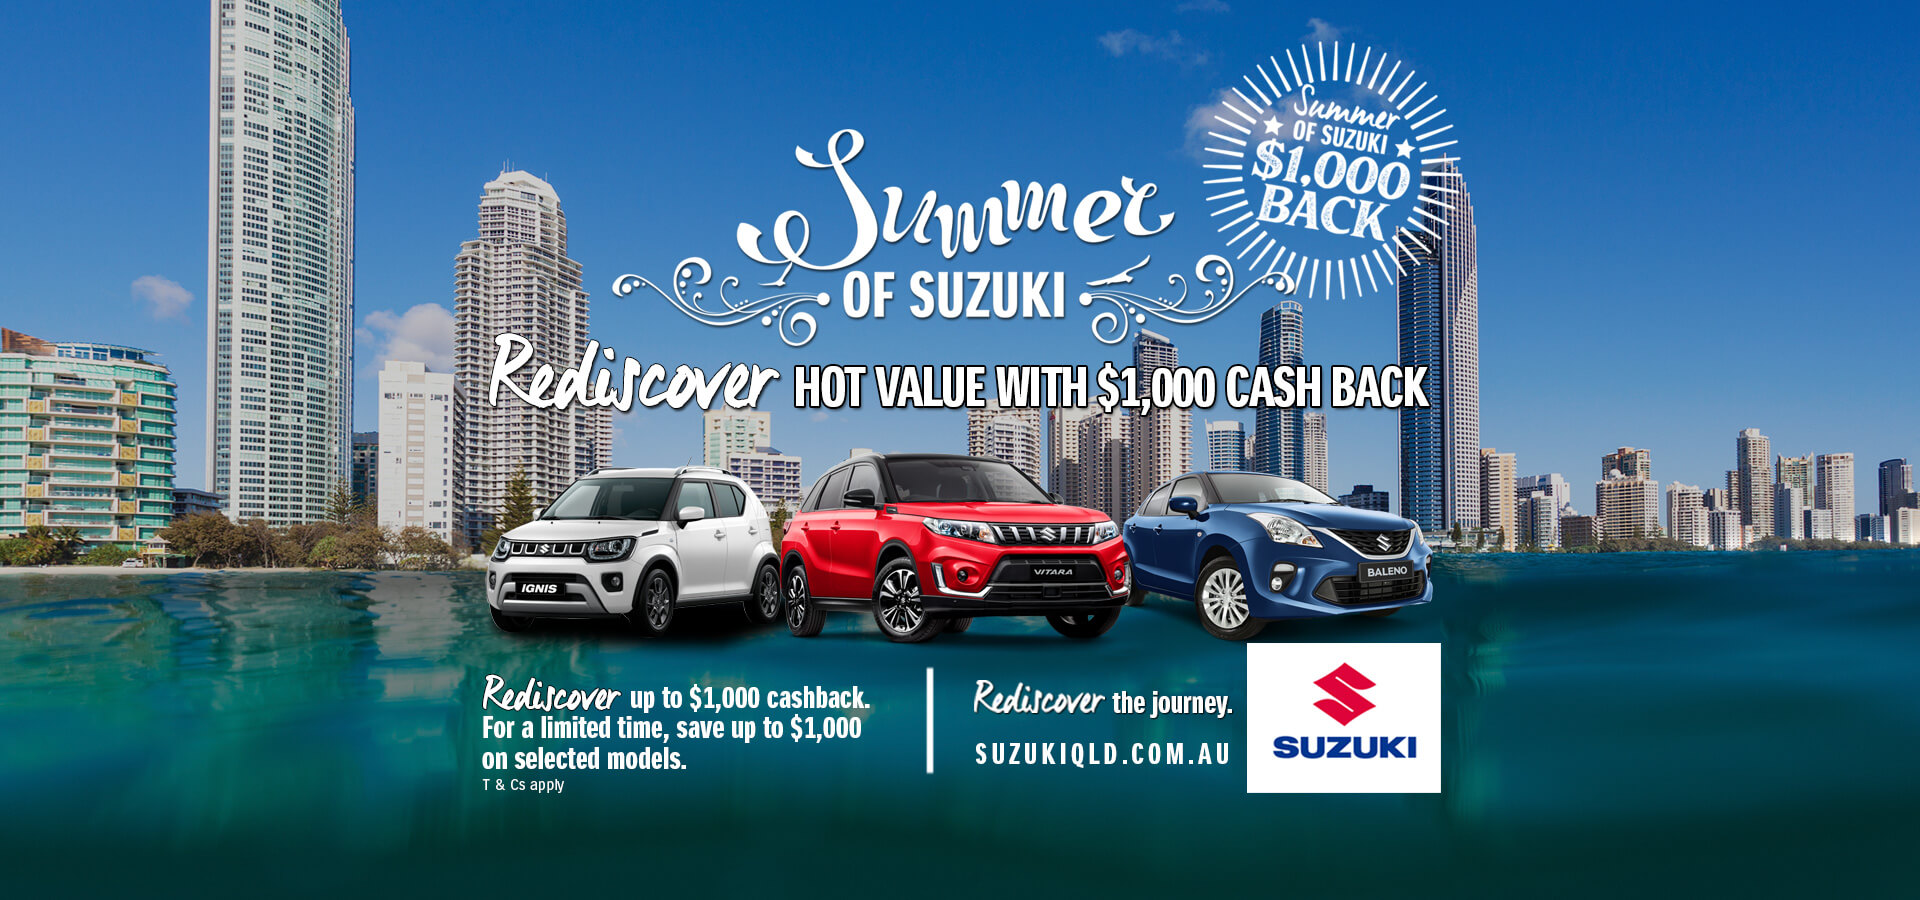 Summer of Suzuki and rediscover hot value with $1,000 Cash Back